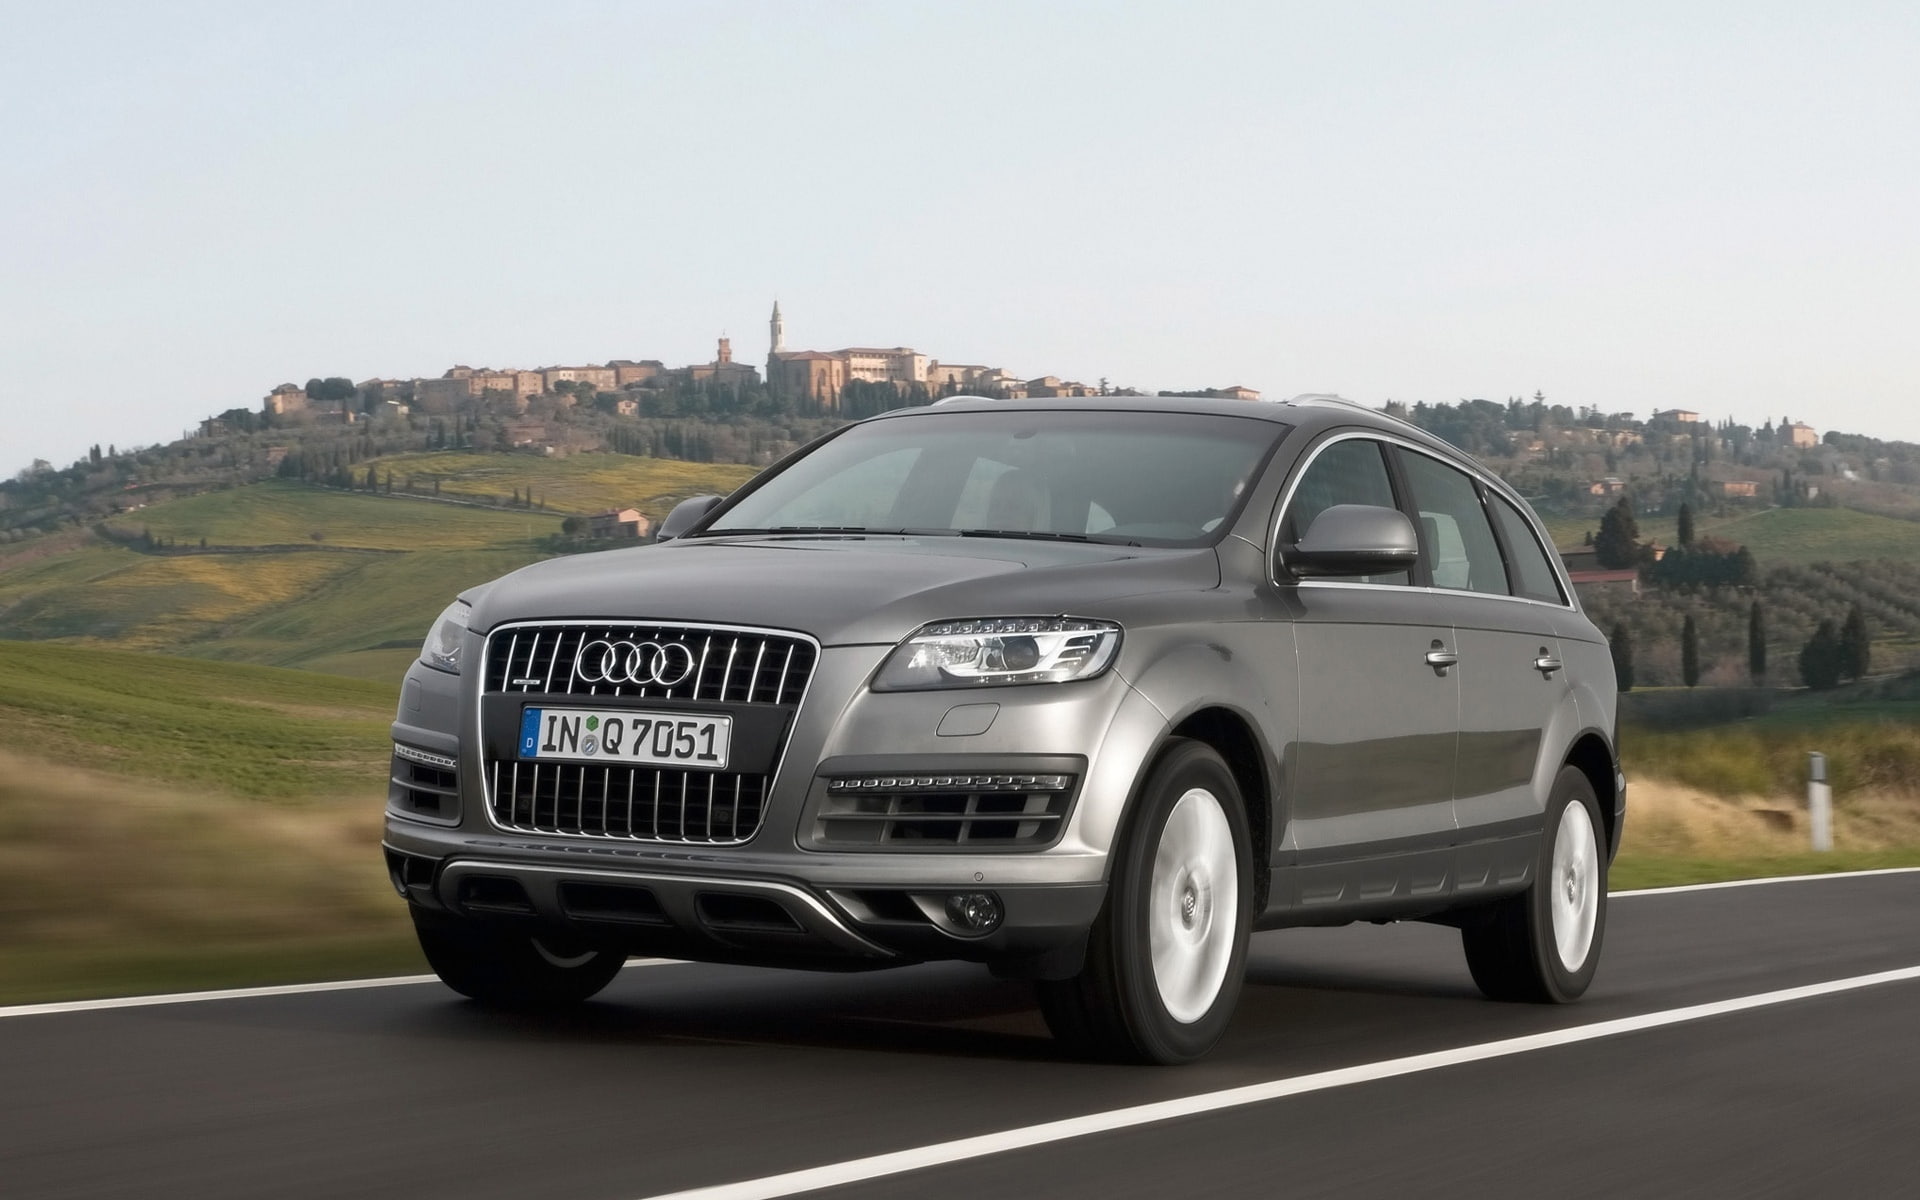 2009 Audi Q7 - Grey Front Angle Speed 1